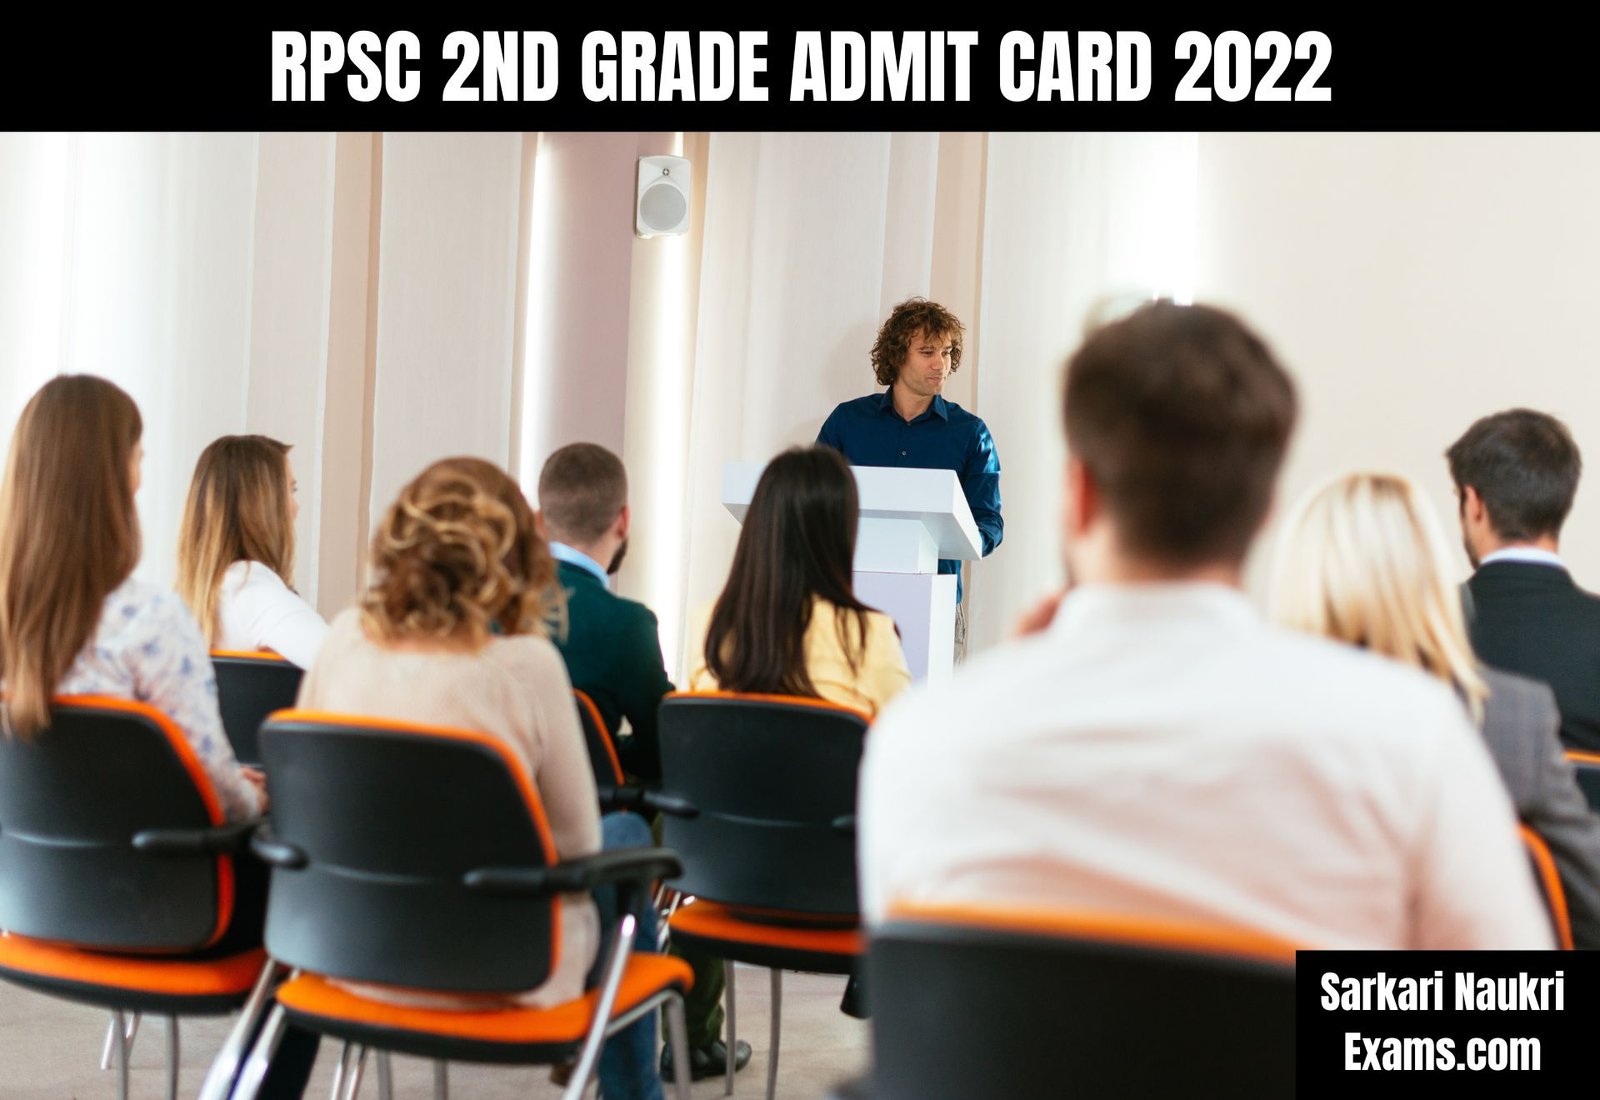 RPSC 2nd Grade Admit Card 2022 | Download Link, Exam Date